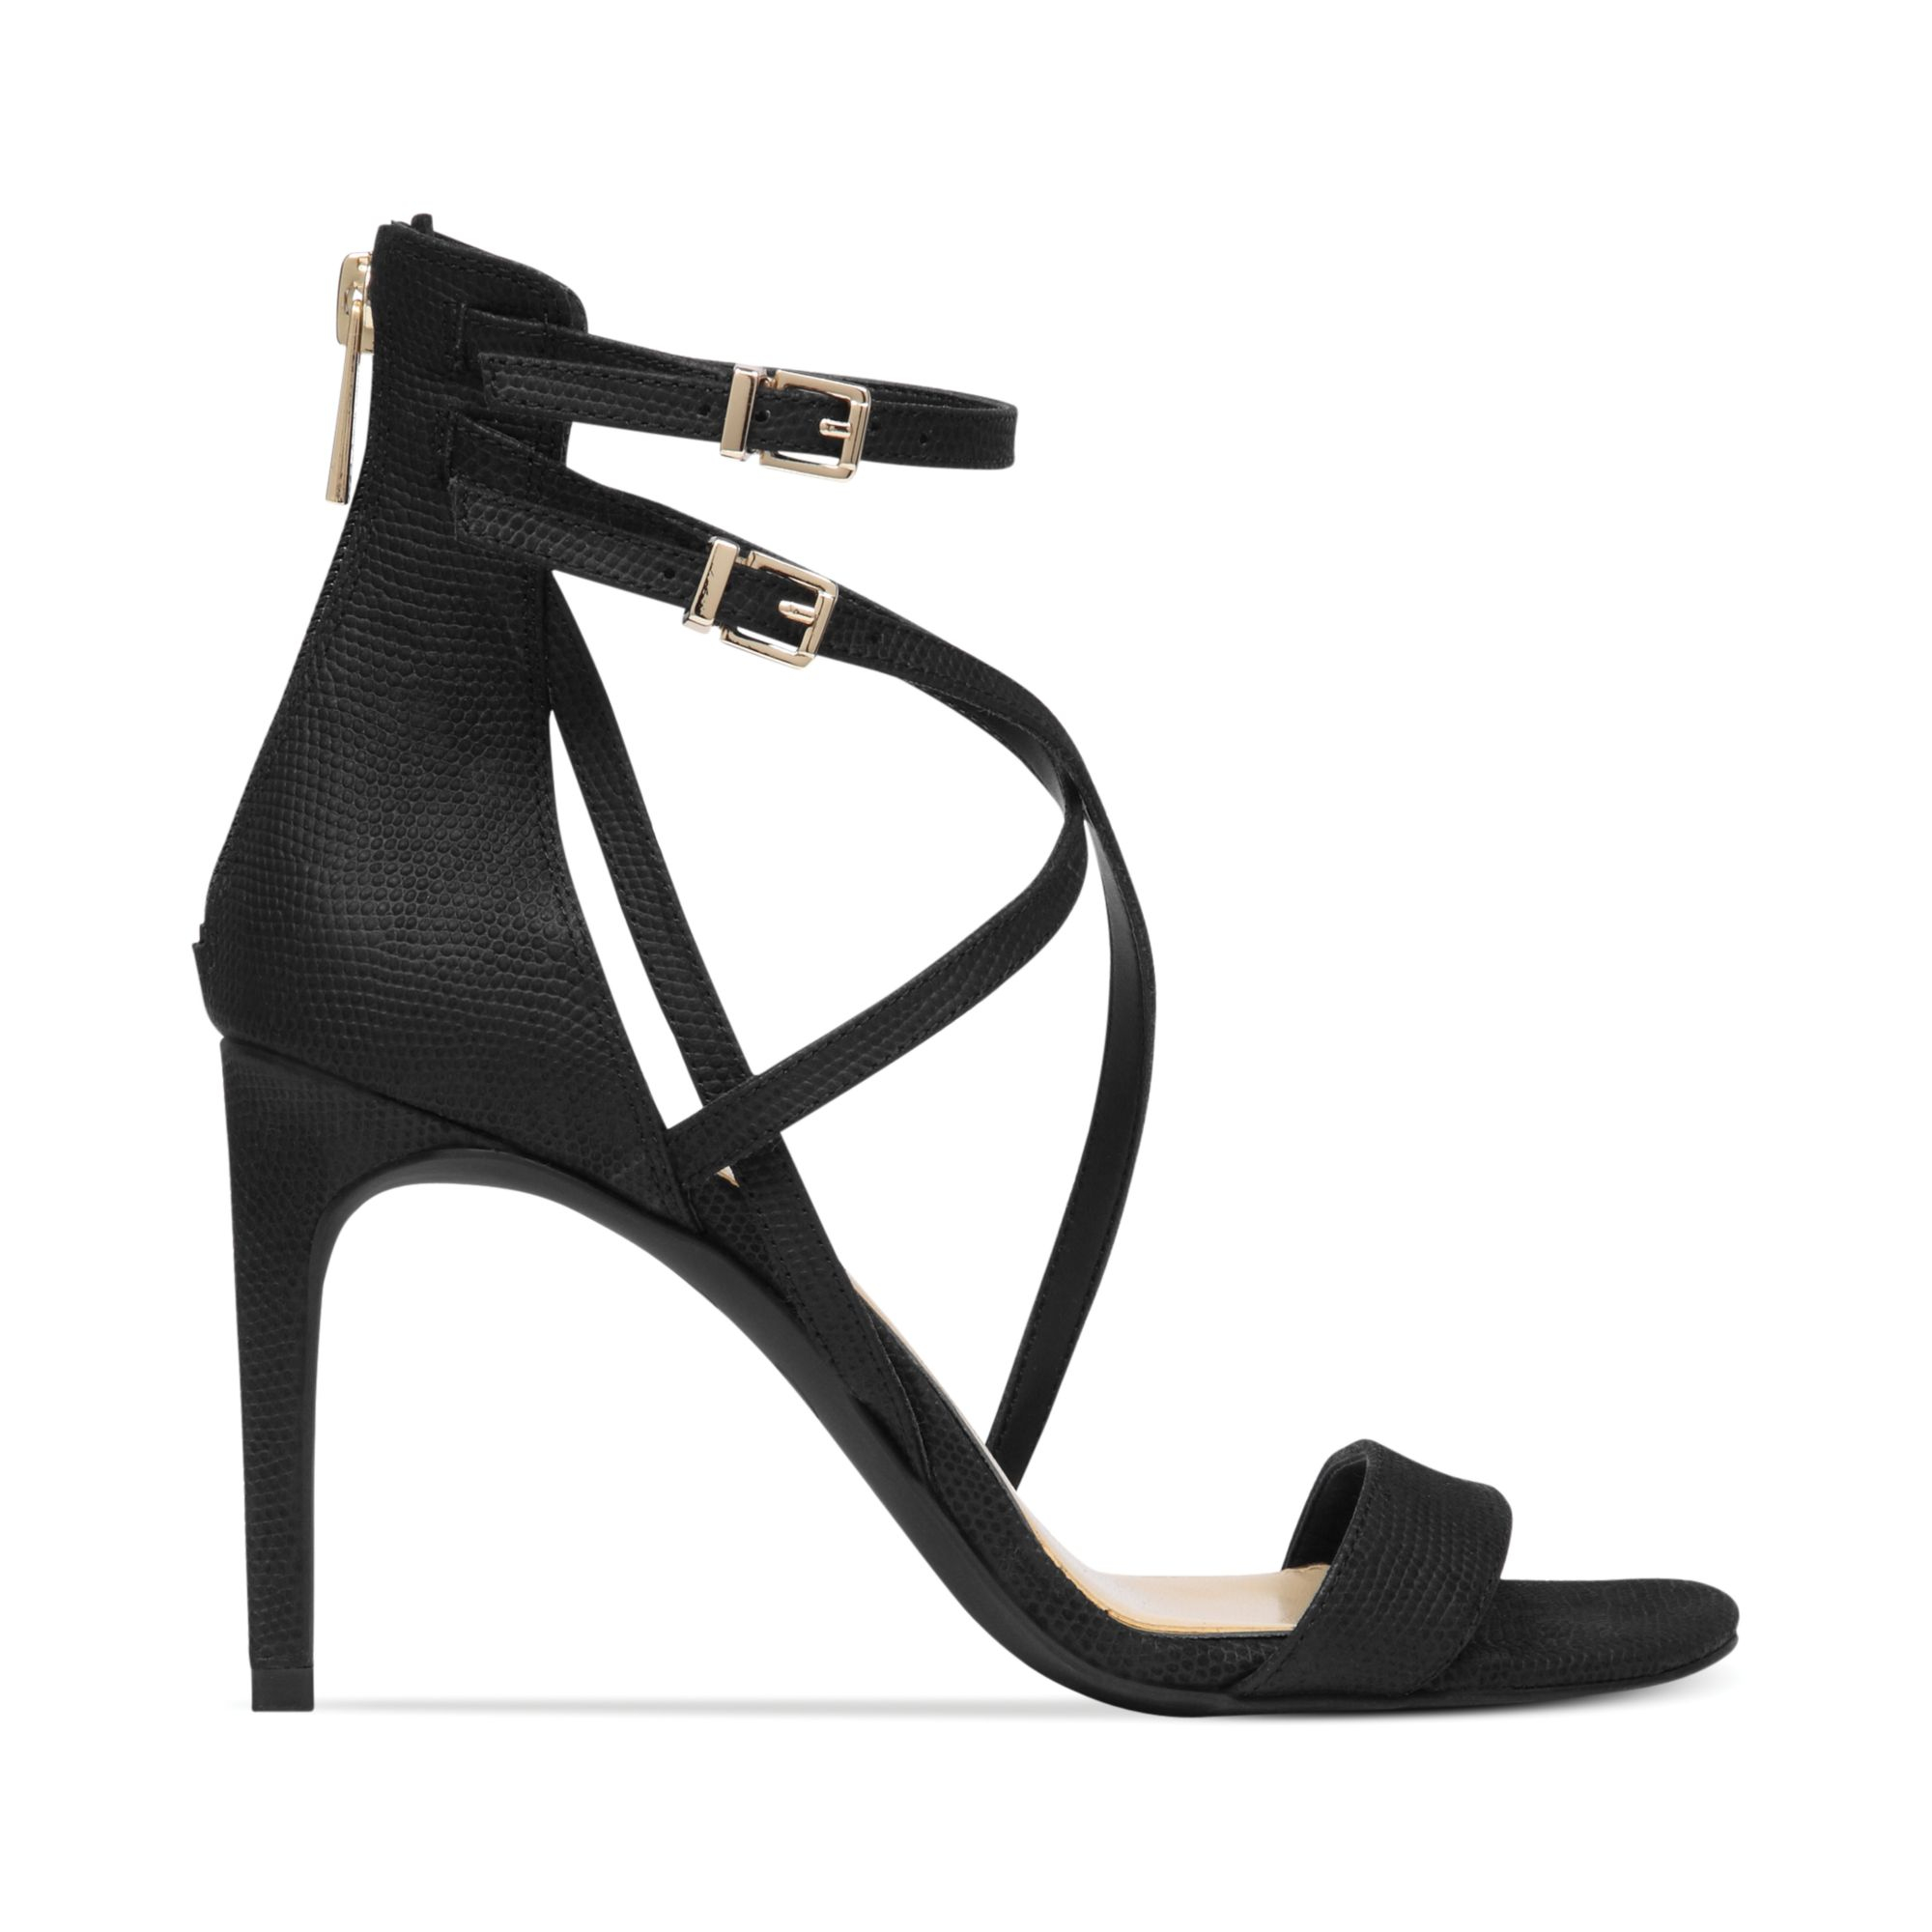 Jessica Simpson Myelle Strappy Sandals in Black | Lyst